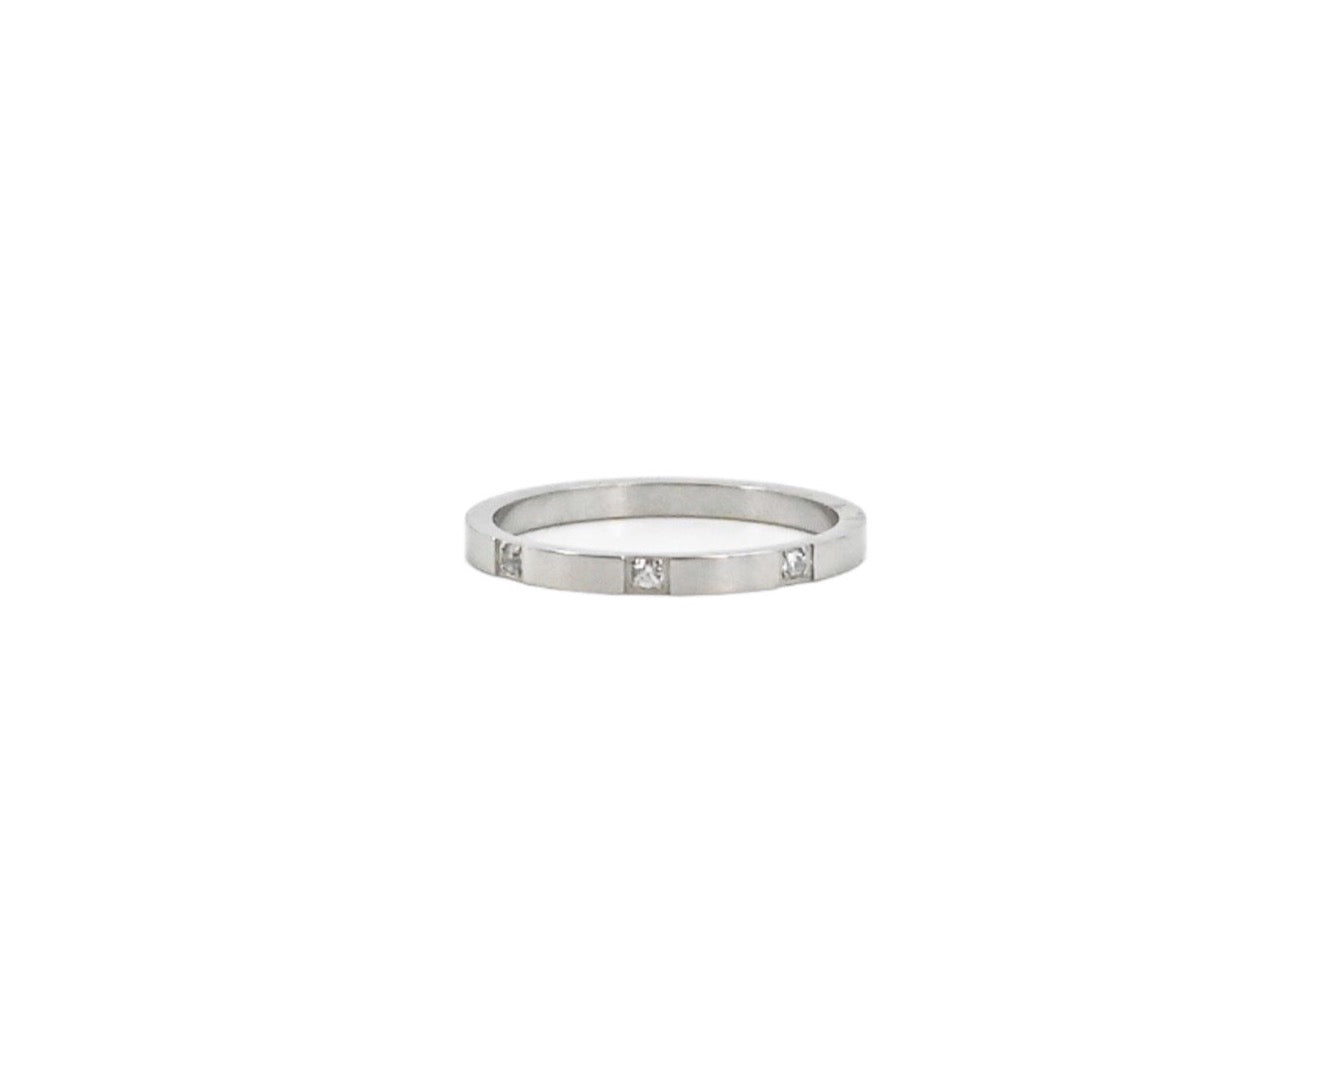 Cartier style ring in silver